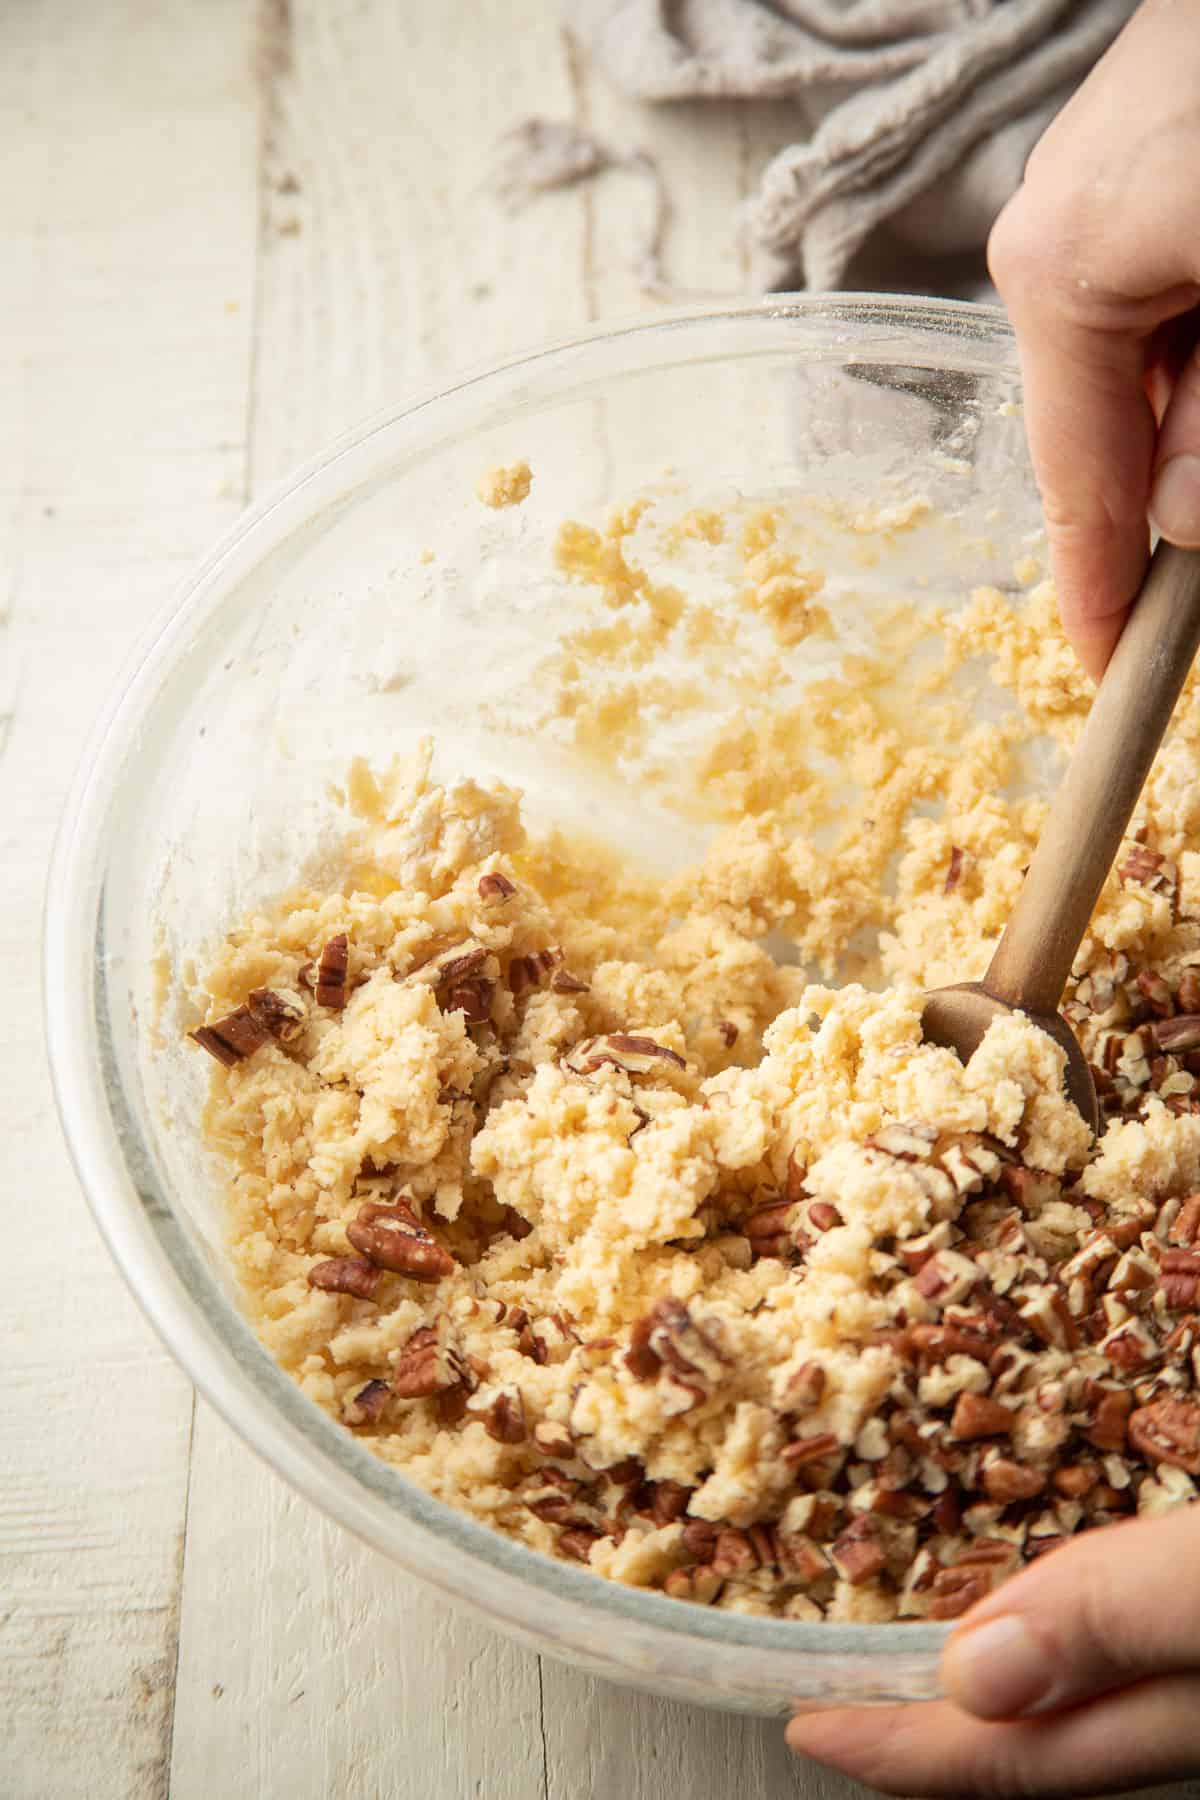 Hand stirring pecans into a bowl of cookie dough.